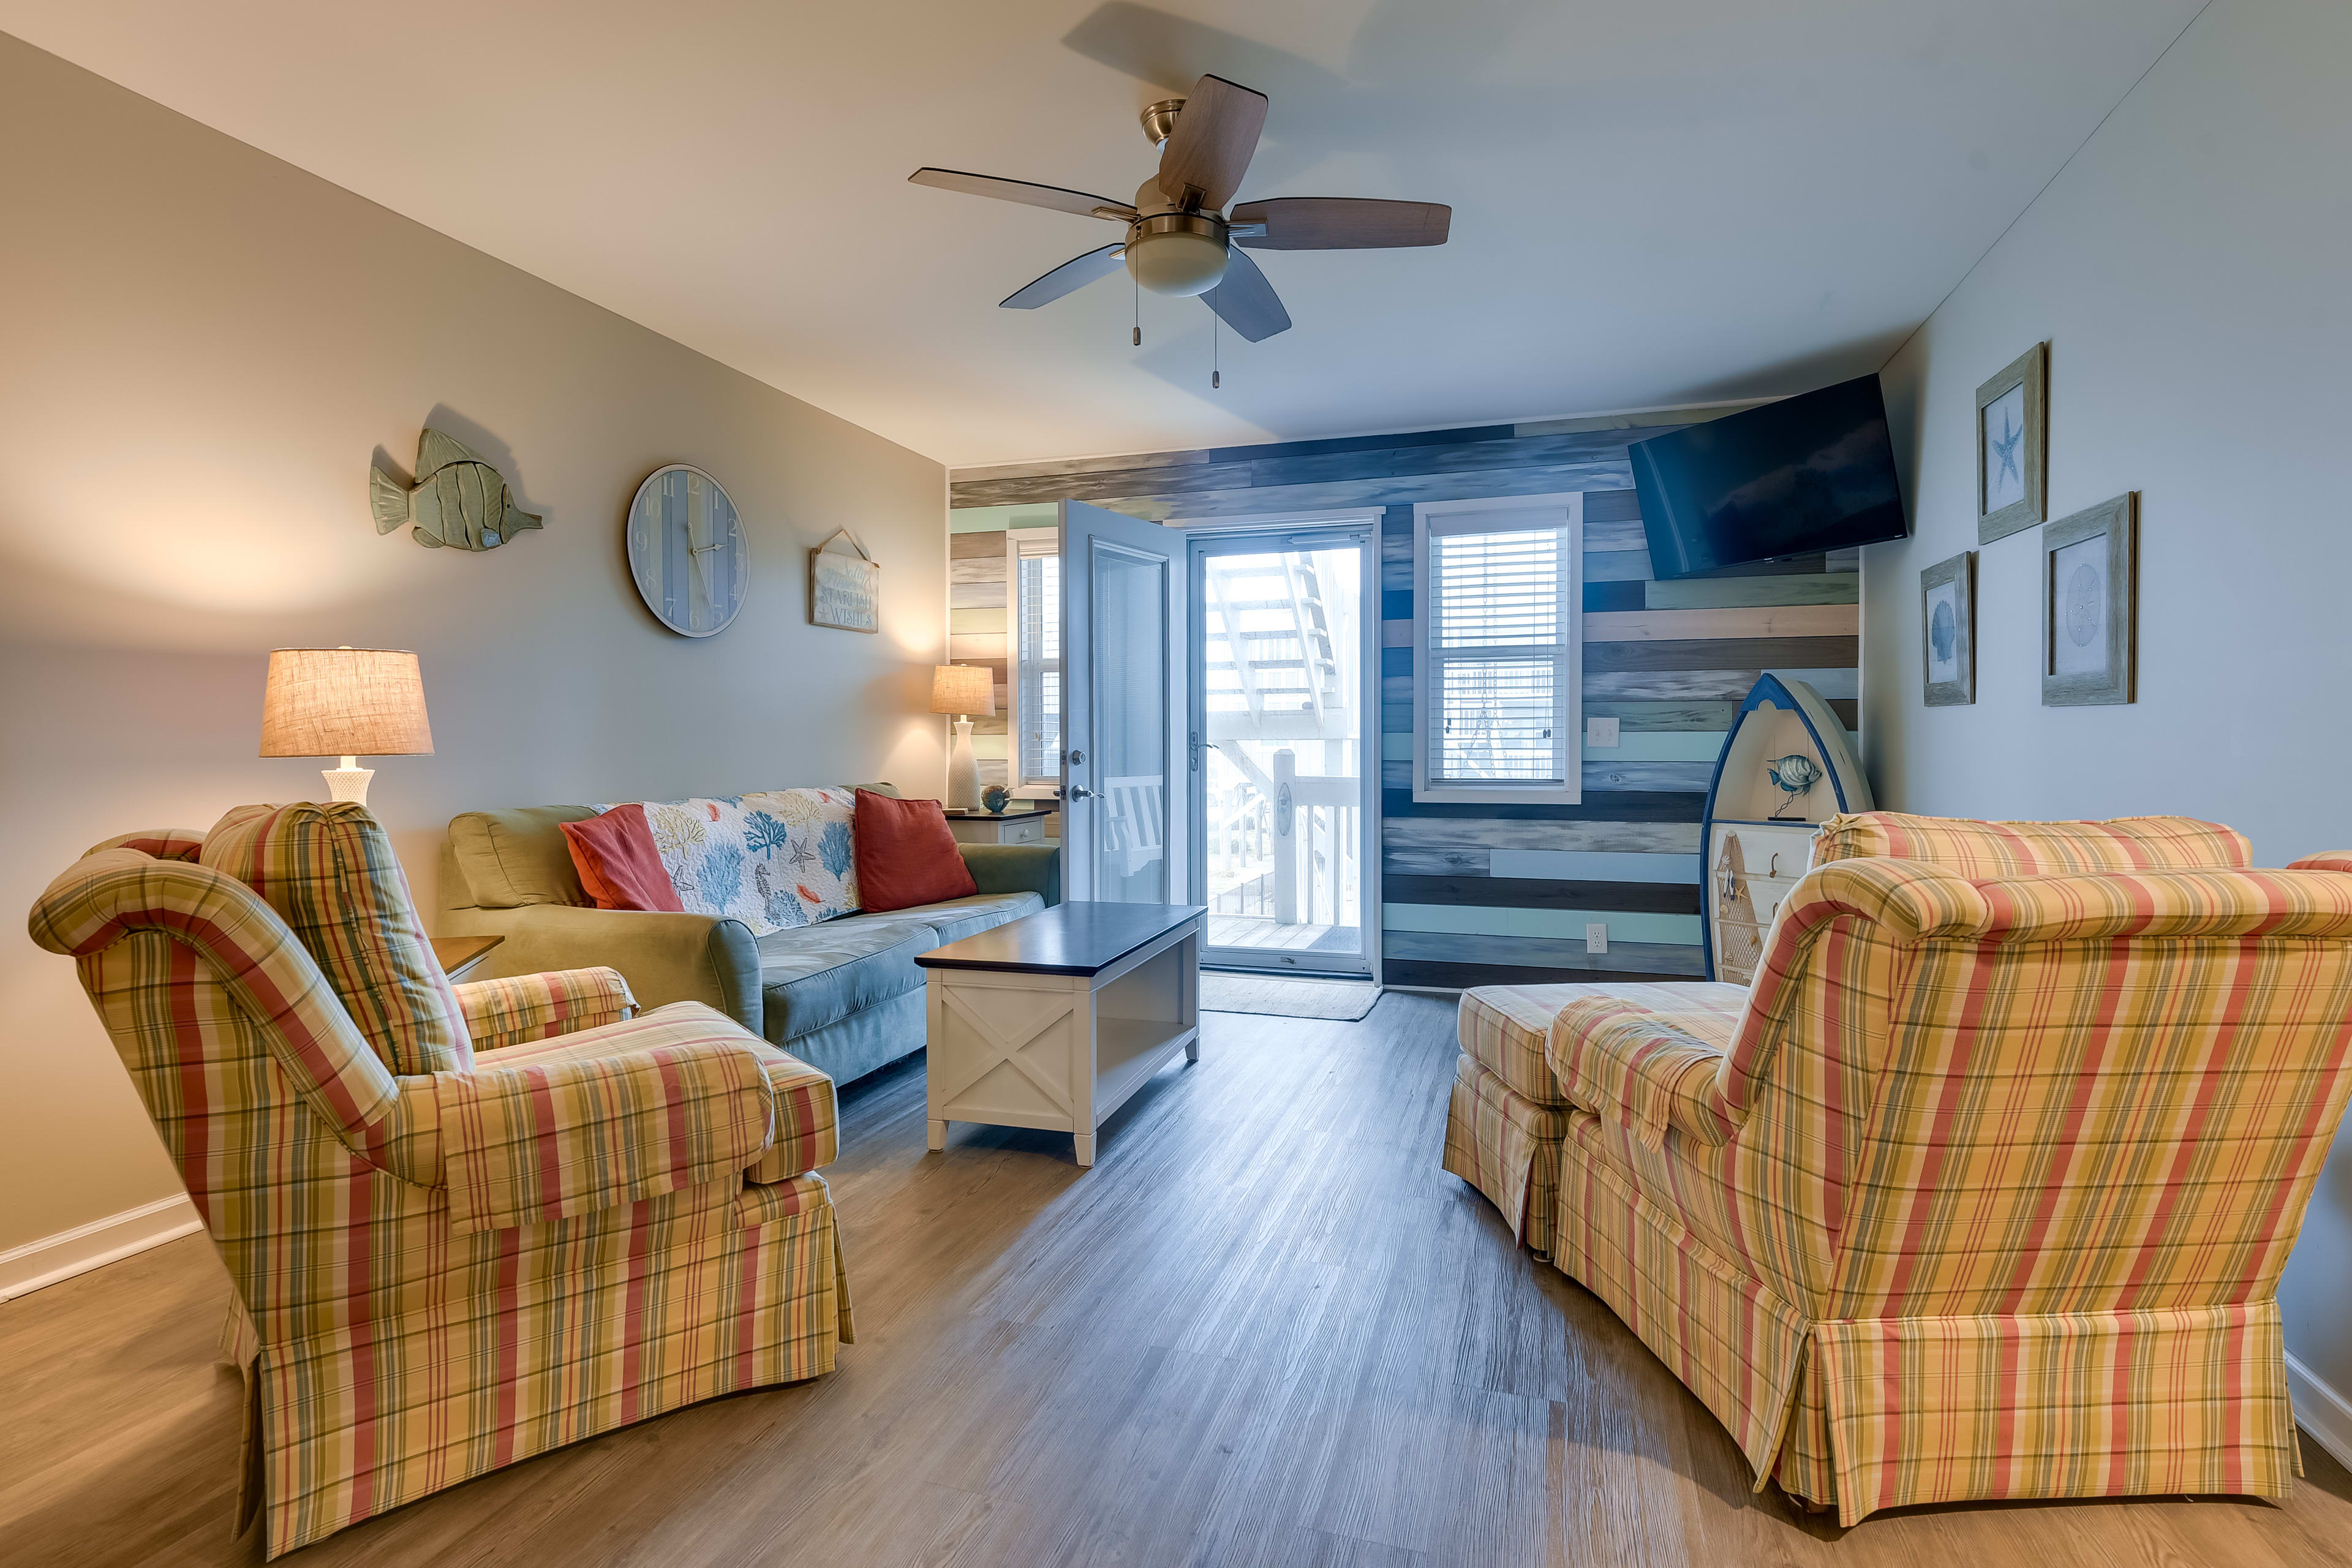 Ocean Isle Beach Vacation Rental | 2BR | 2BA | 986 Sq Ft | Stairs to Enter